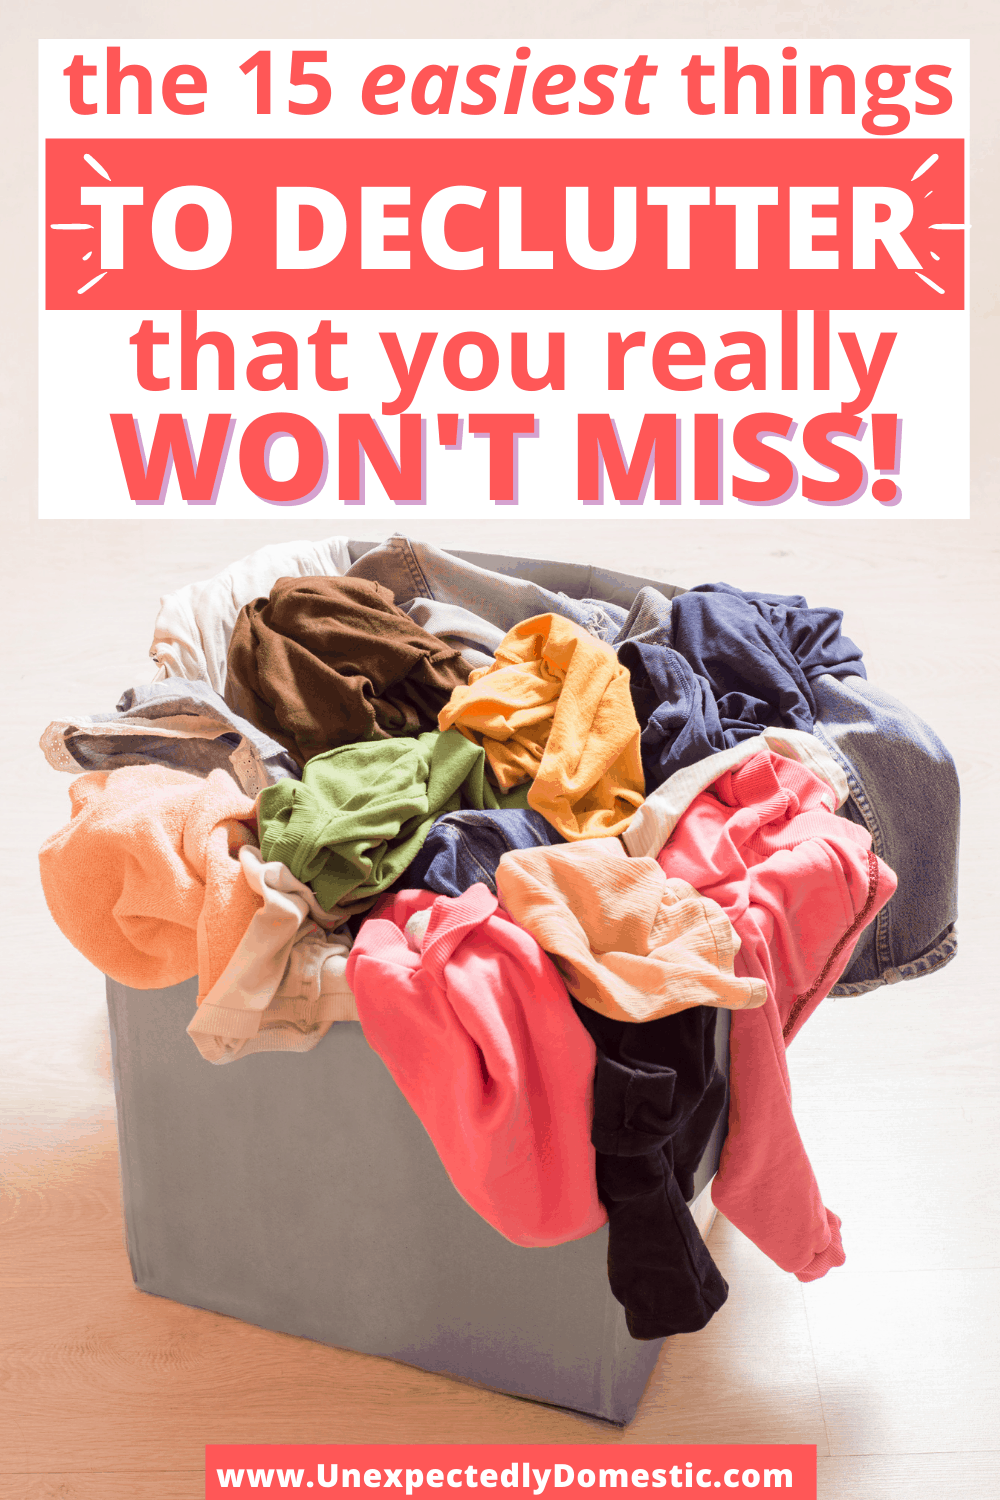 15 of the easiest things to declutter! Forget starting with the hardest things - start with this SIMPLE list of things to declutter...and watch your momentum grow!